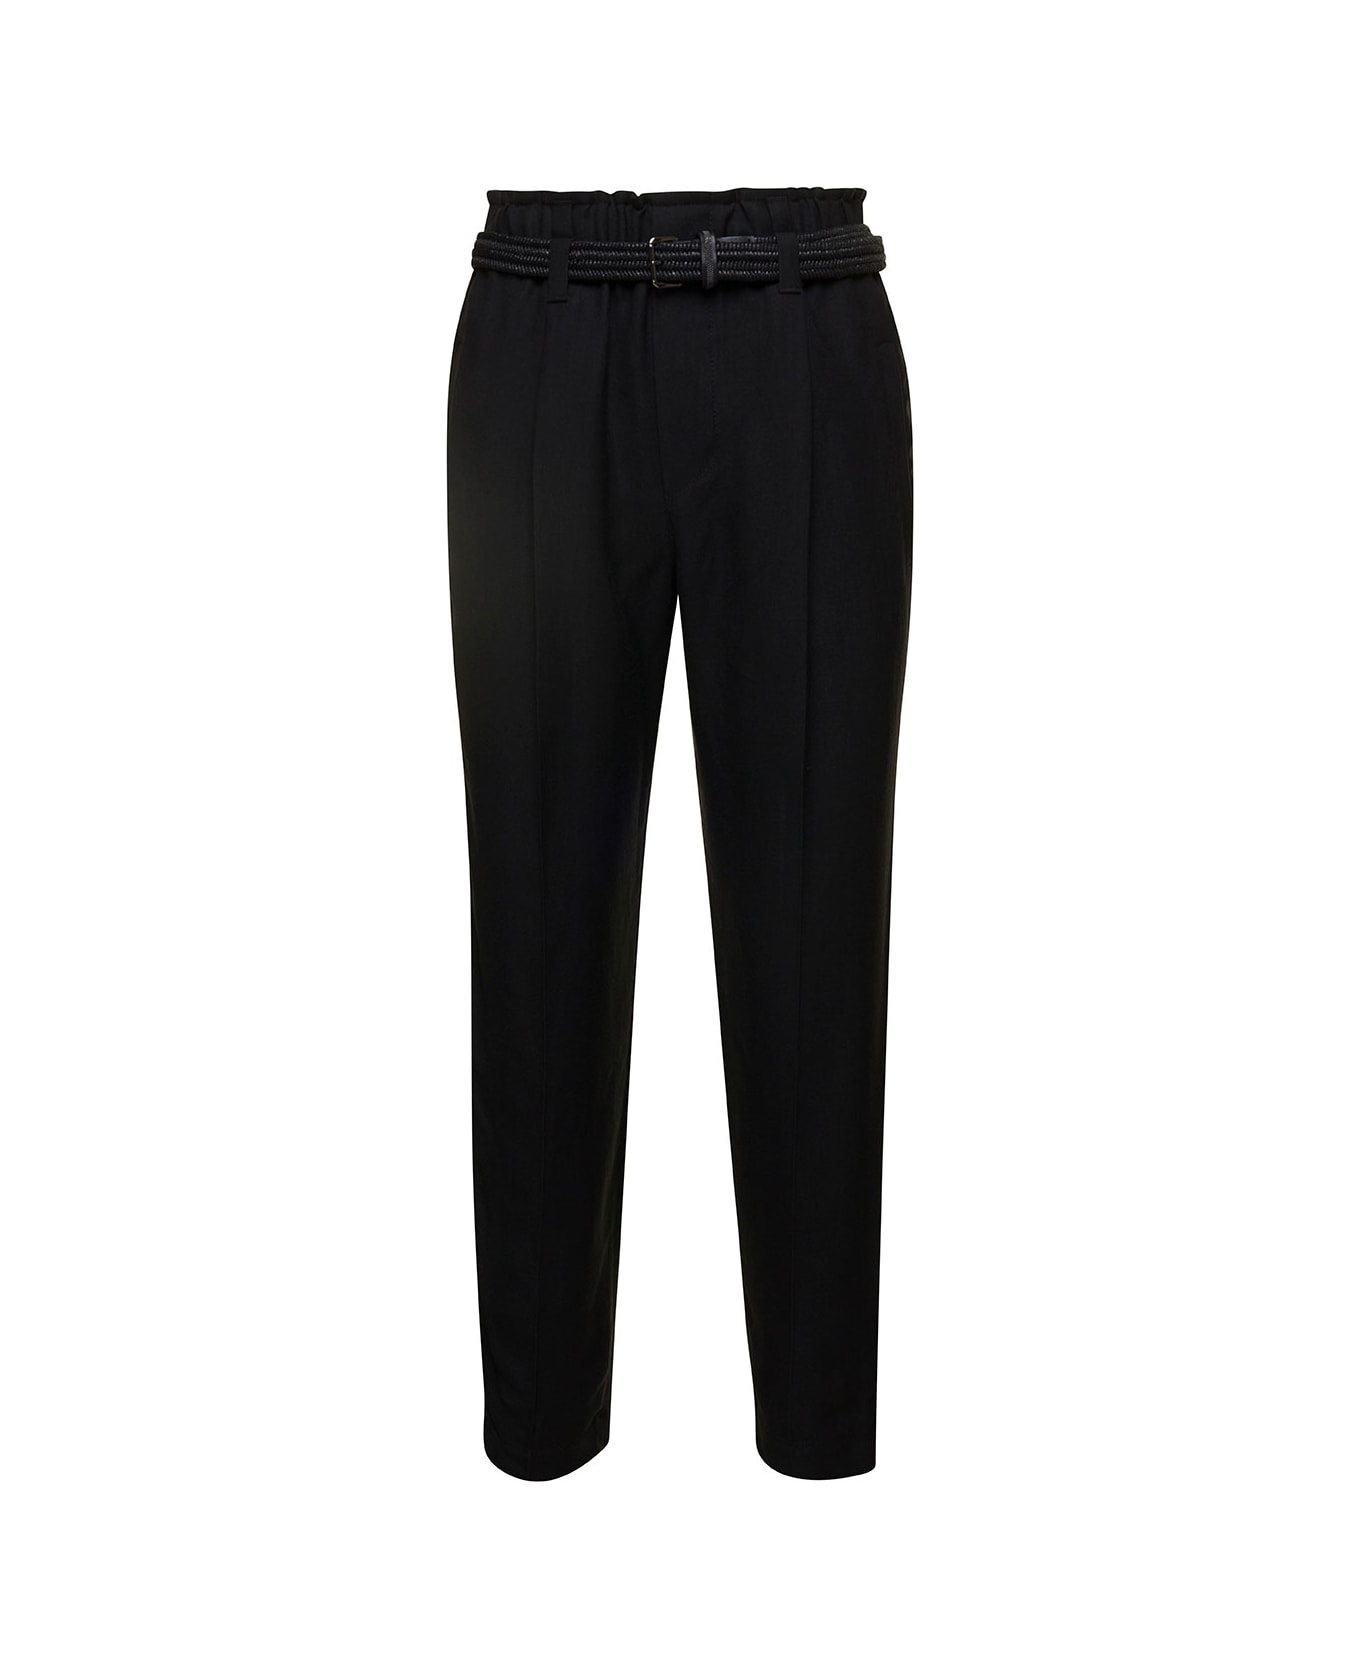 Brunello Cucinelli Black Cropped Pull-up Pants With Belt In Rayon Blend Woman - Black